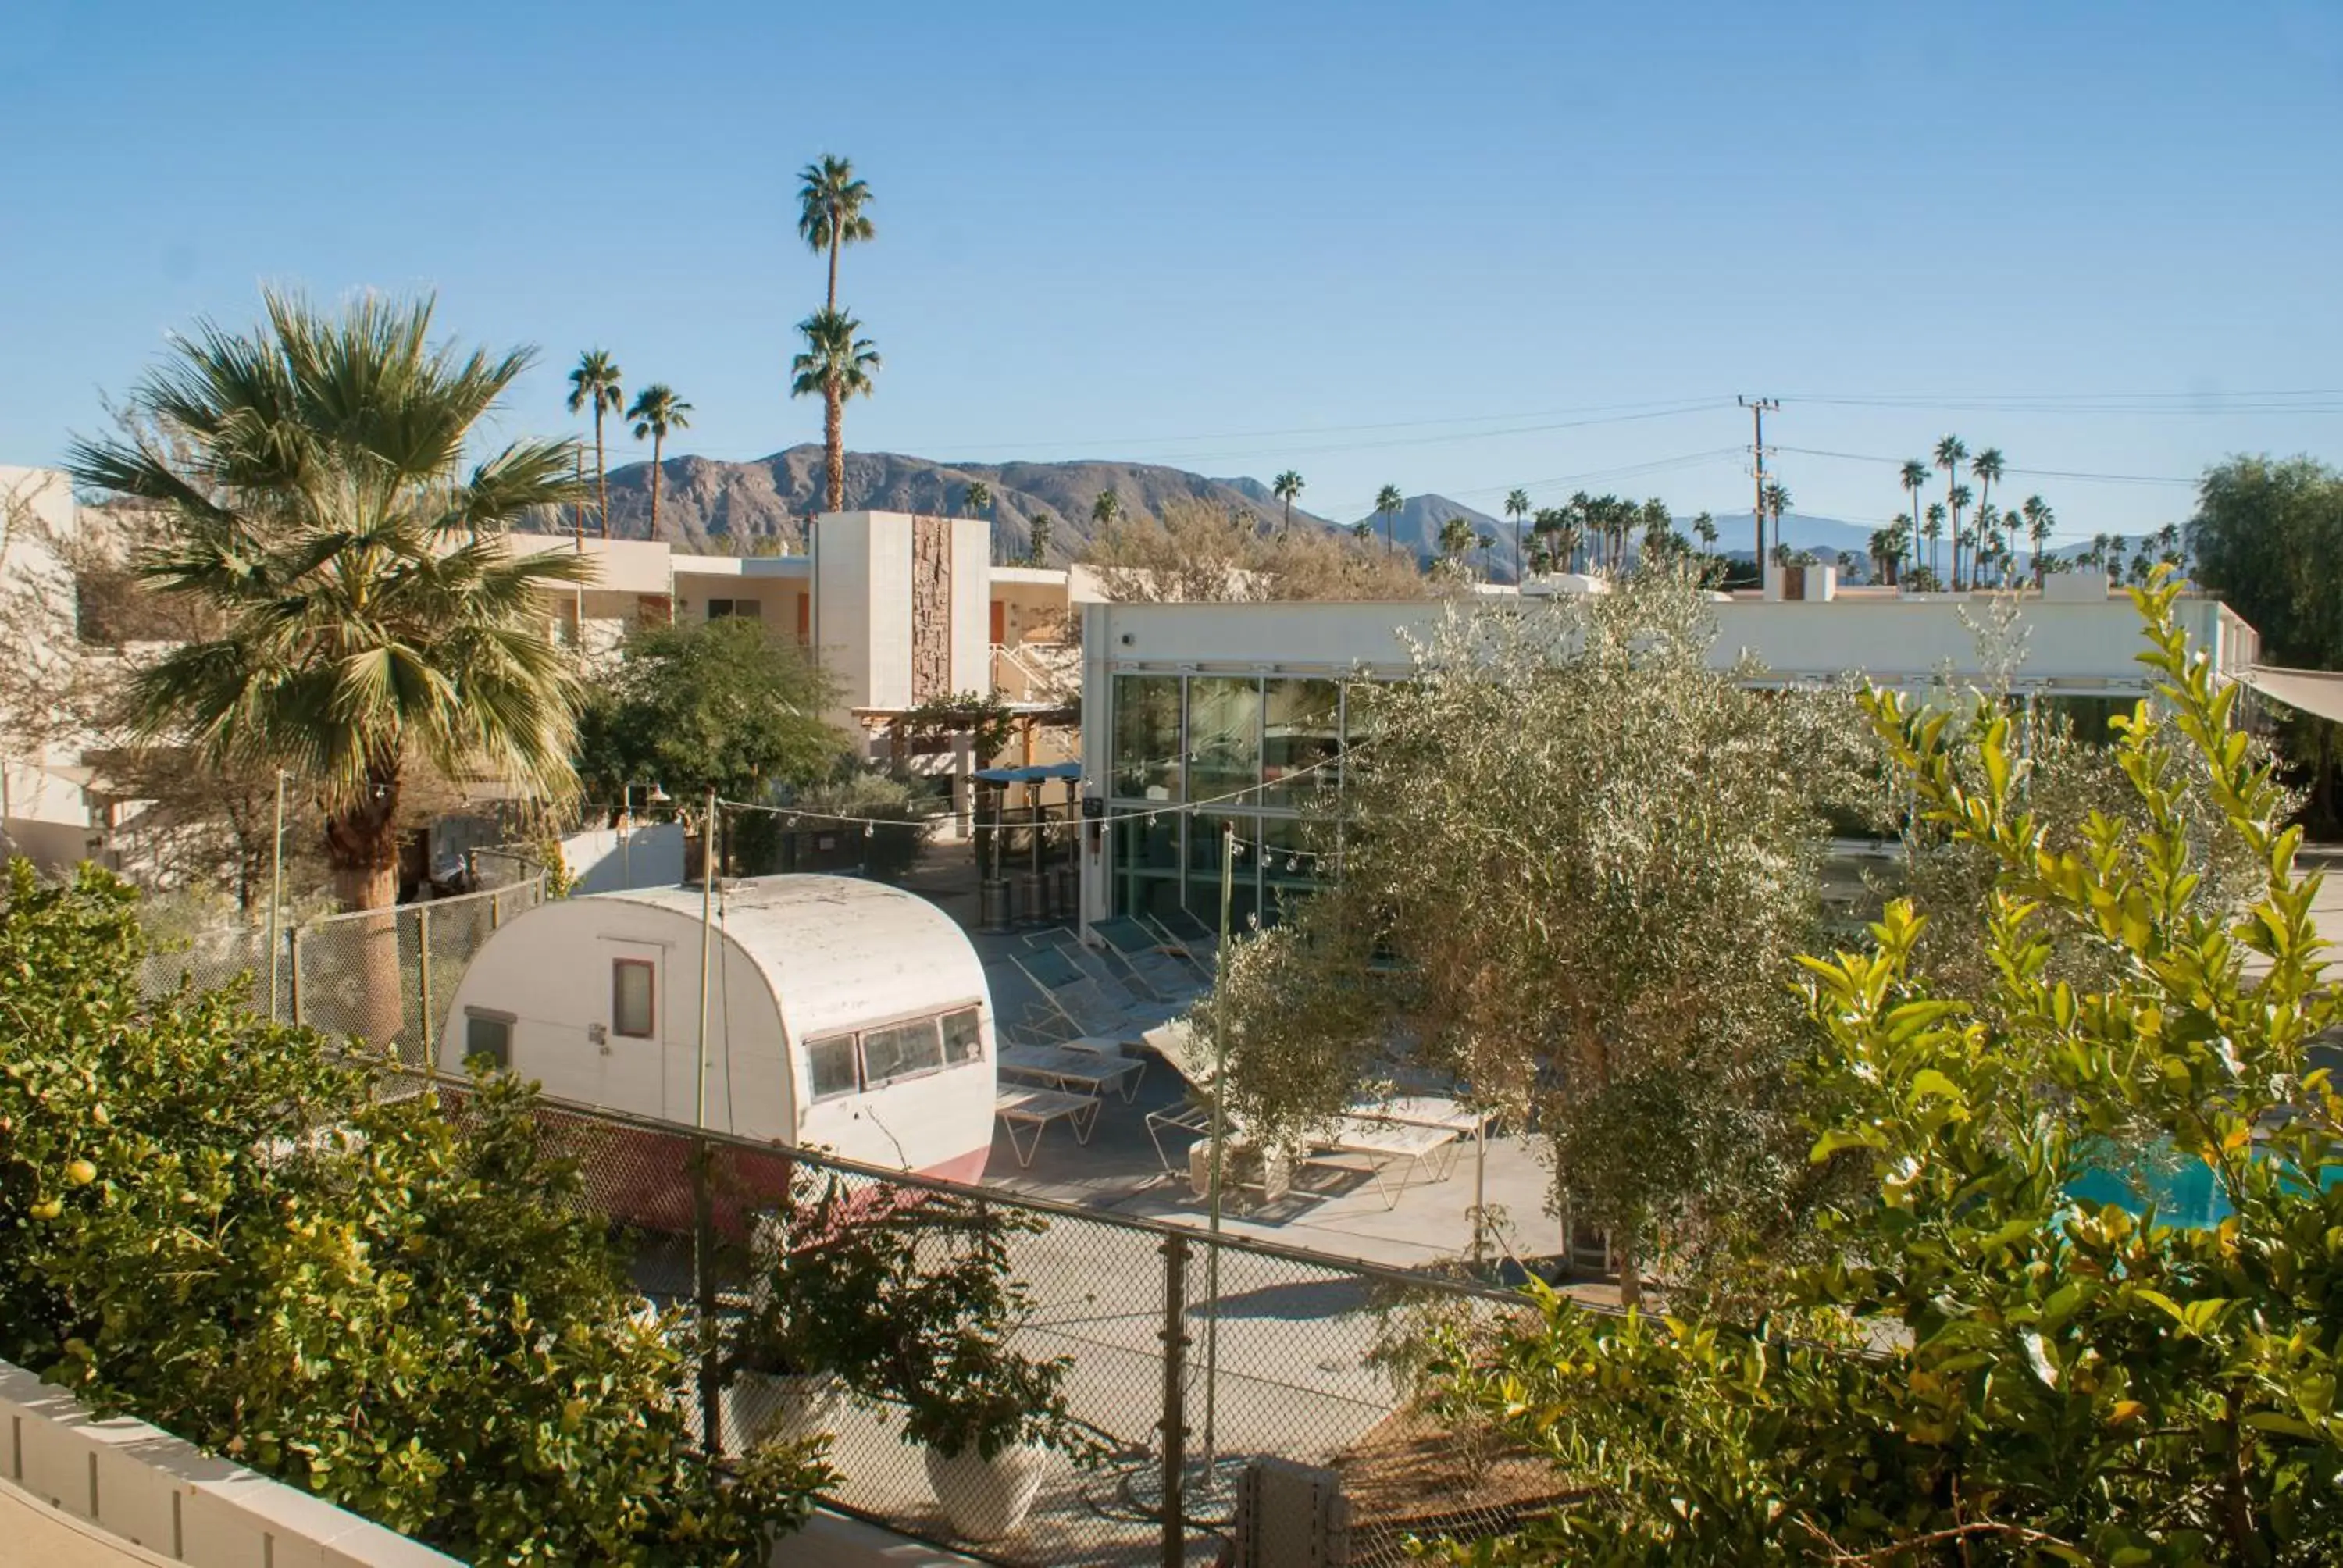 Area and facilities in Ace Hotel and Swim Club Palm Springs